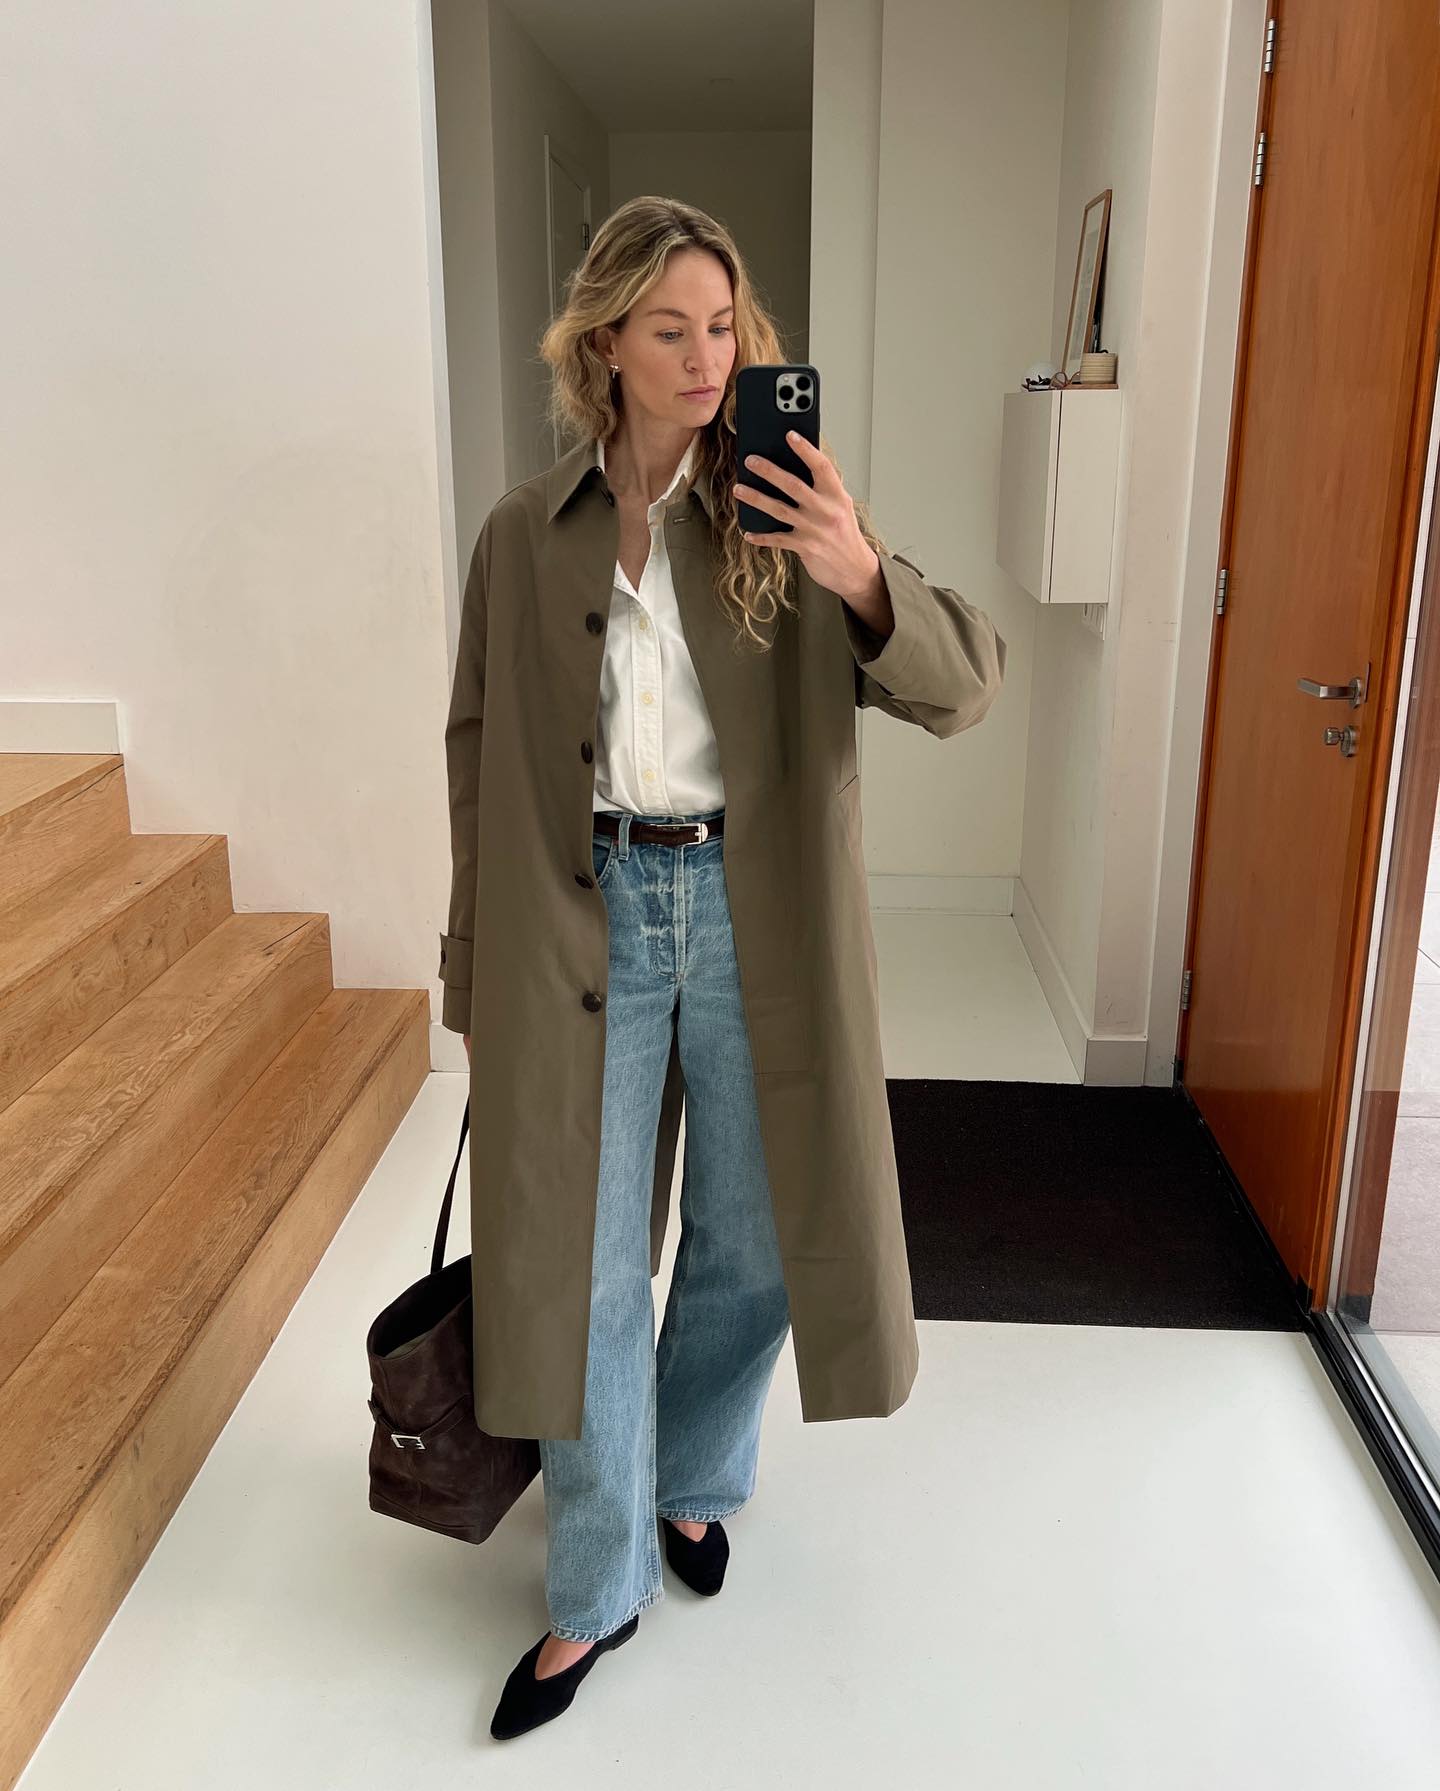 a stylish woman poses for a mirror selfie wearing a green trench coat, white button-down shirt, skinny belt, straight-leg jeans, The Row Margaux bag, and pointed-toe flats